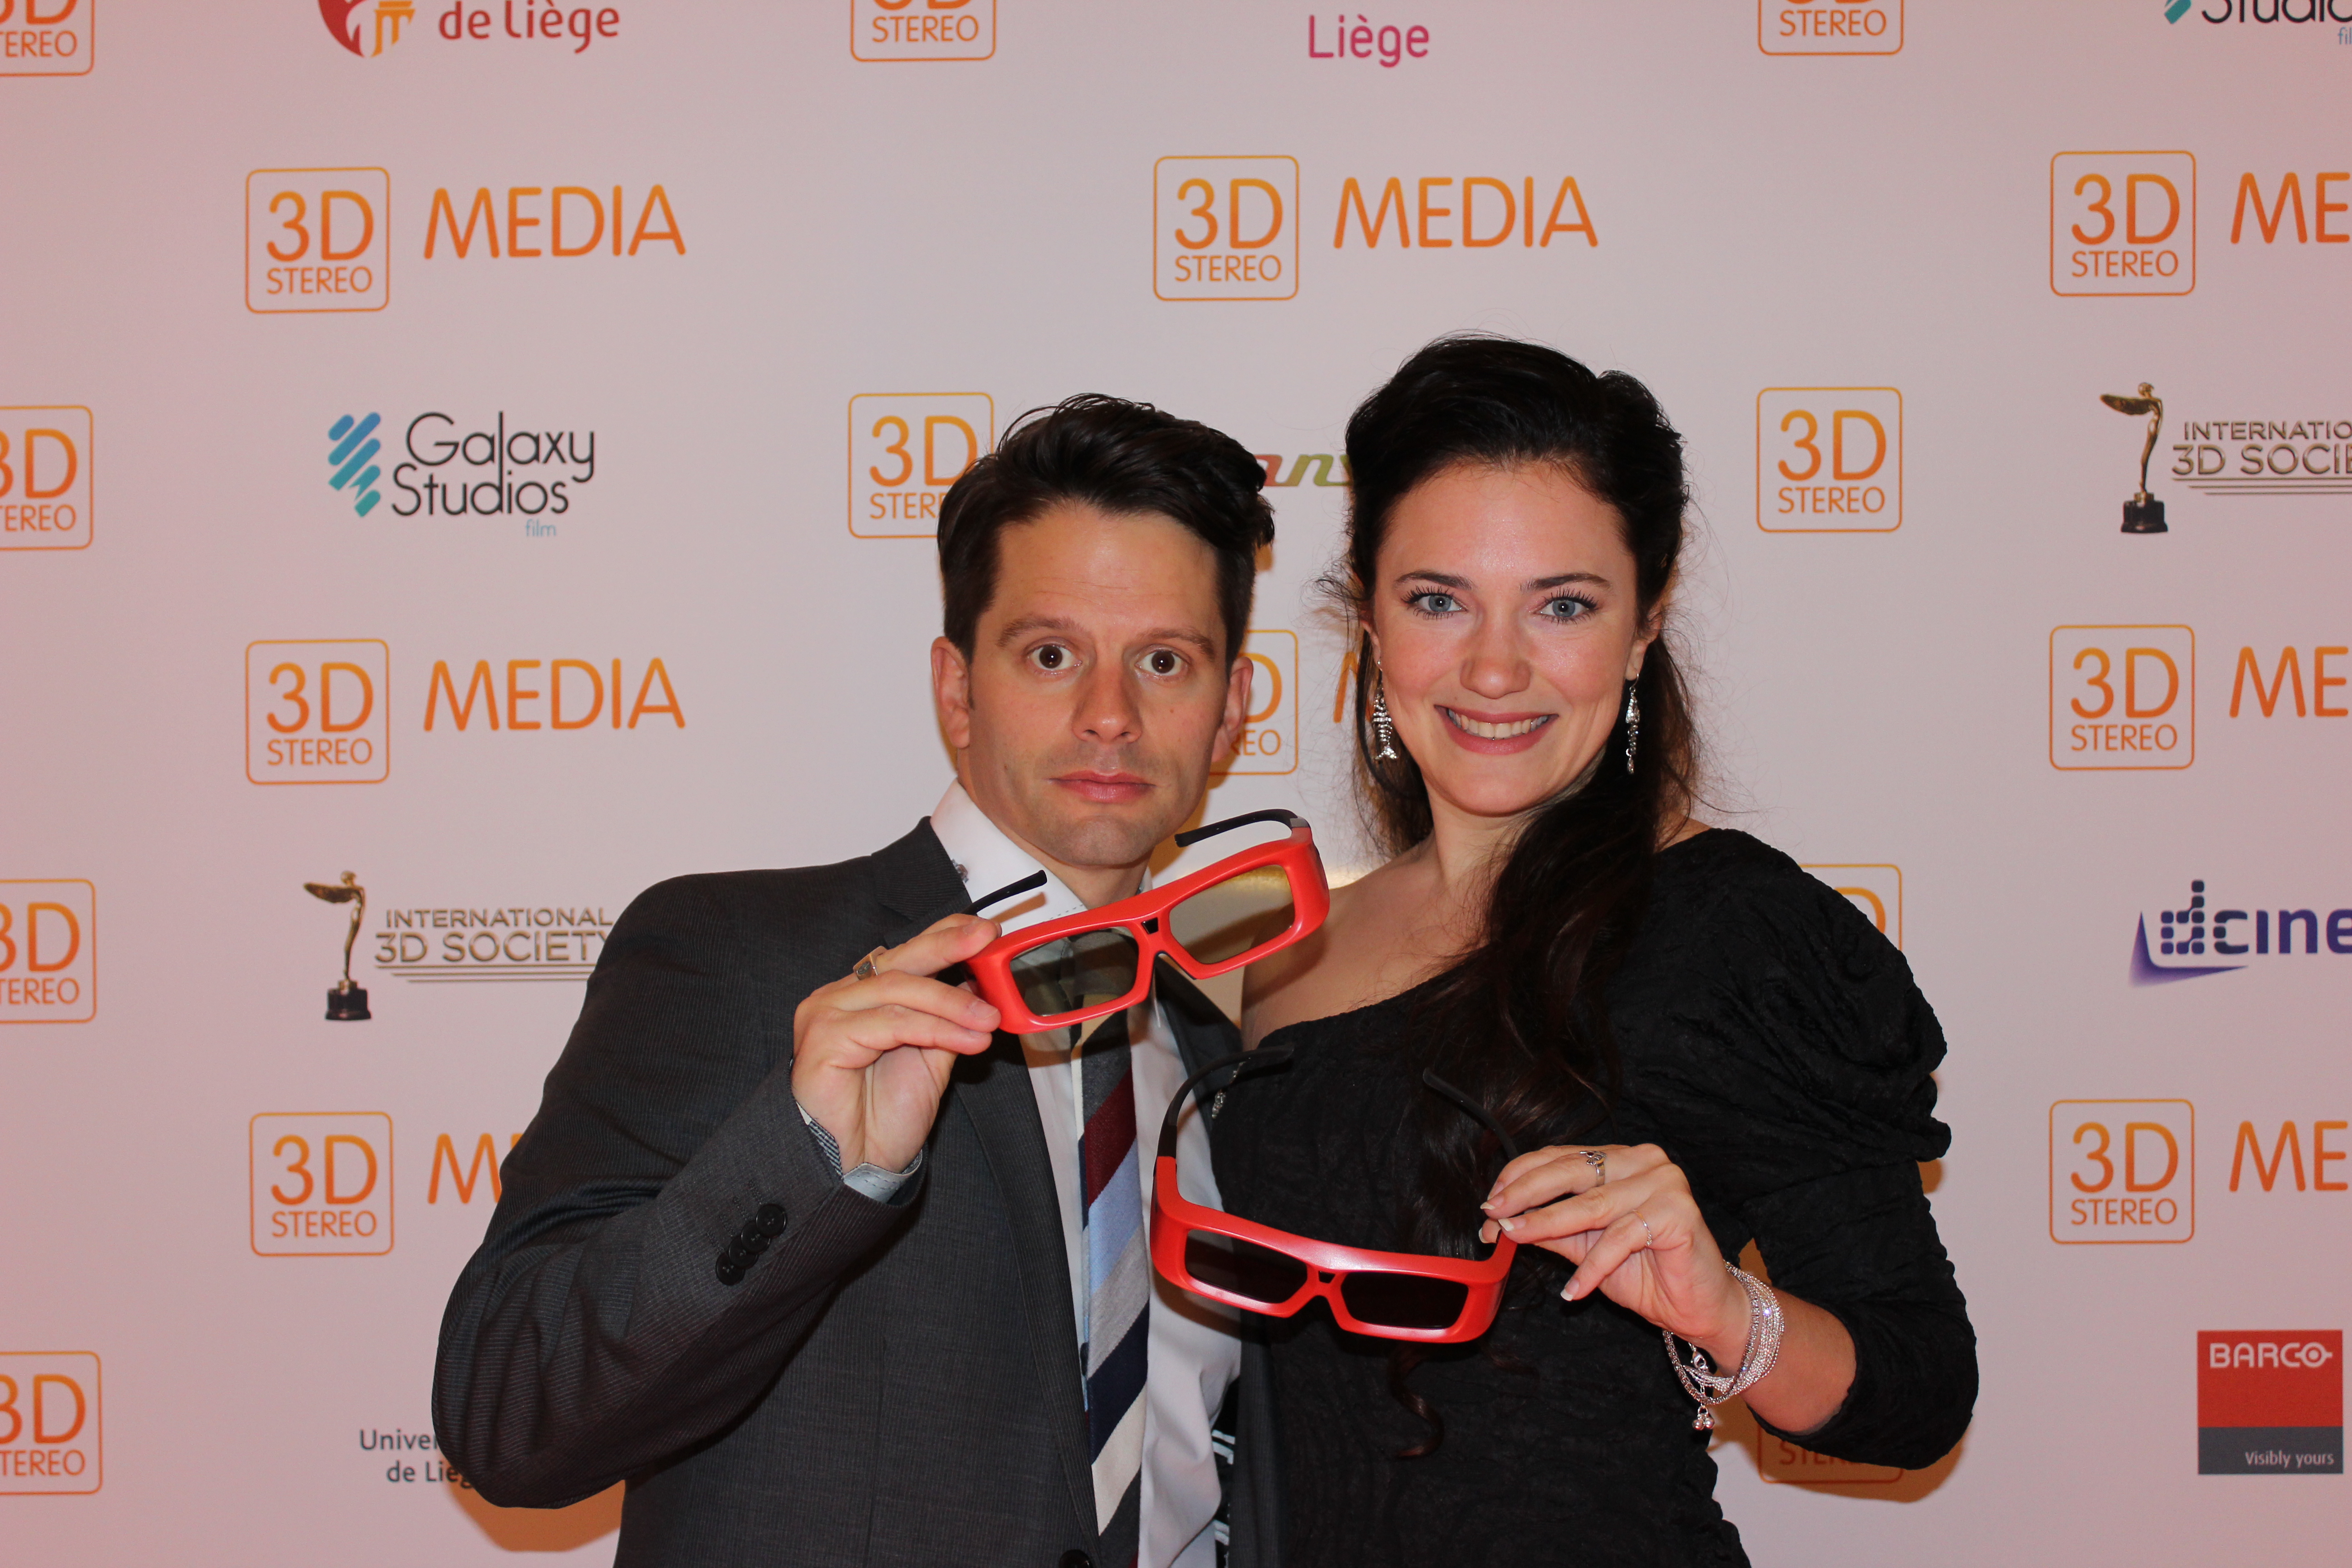 Tim Doiron and April Mullen attending the 3D Stereo Media Summit in Liege, Belgium where Dead Before Dawn 3D won the Perron Crystal Award for Best Live Action 3D Feature Film, 2012.